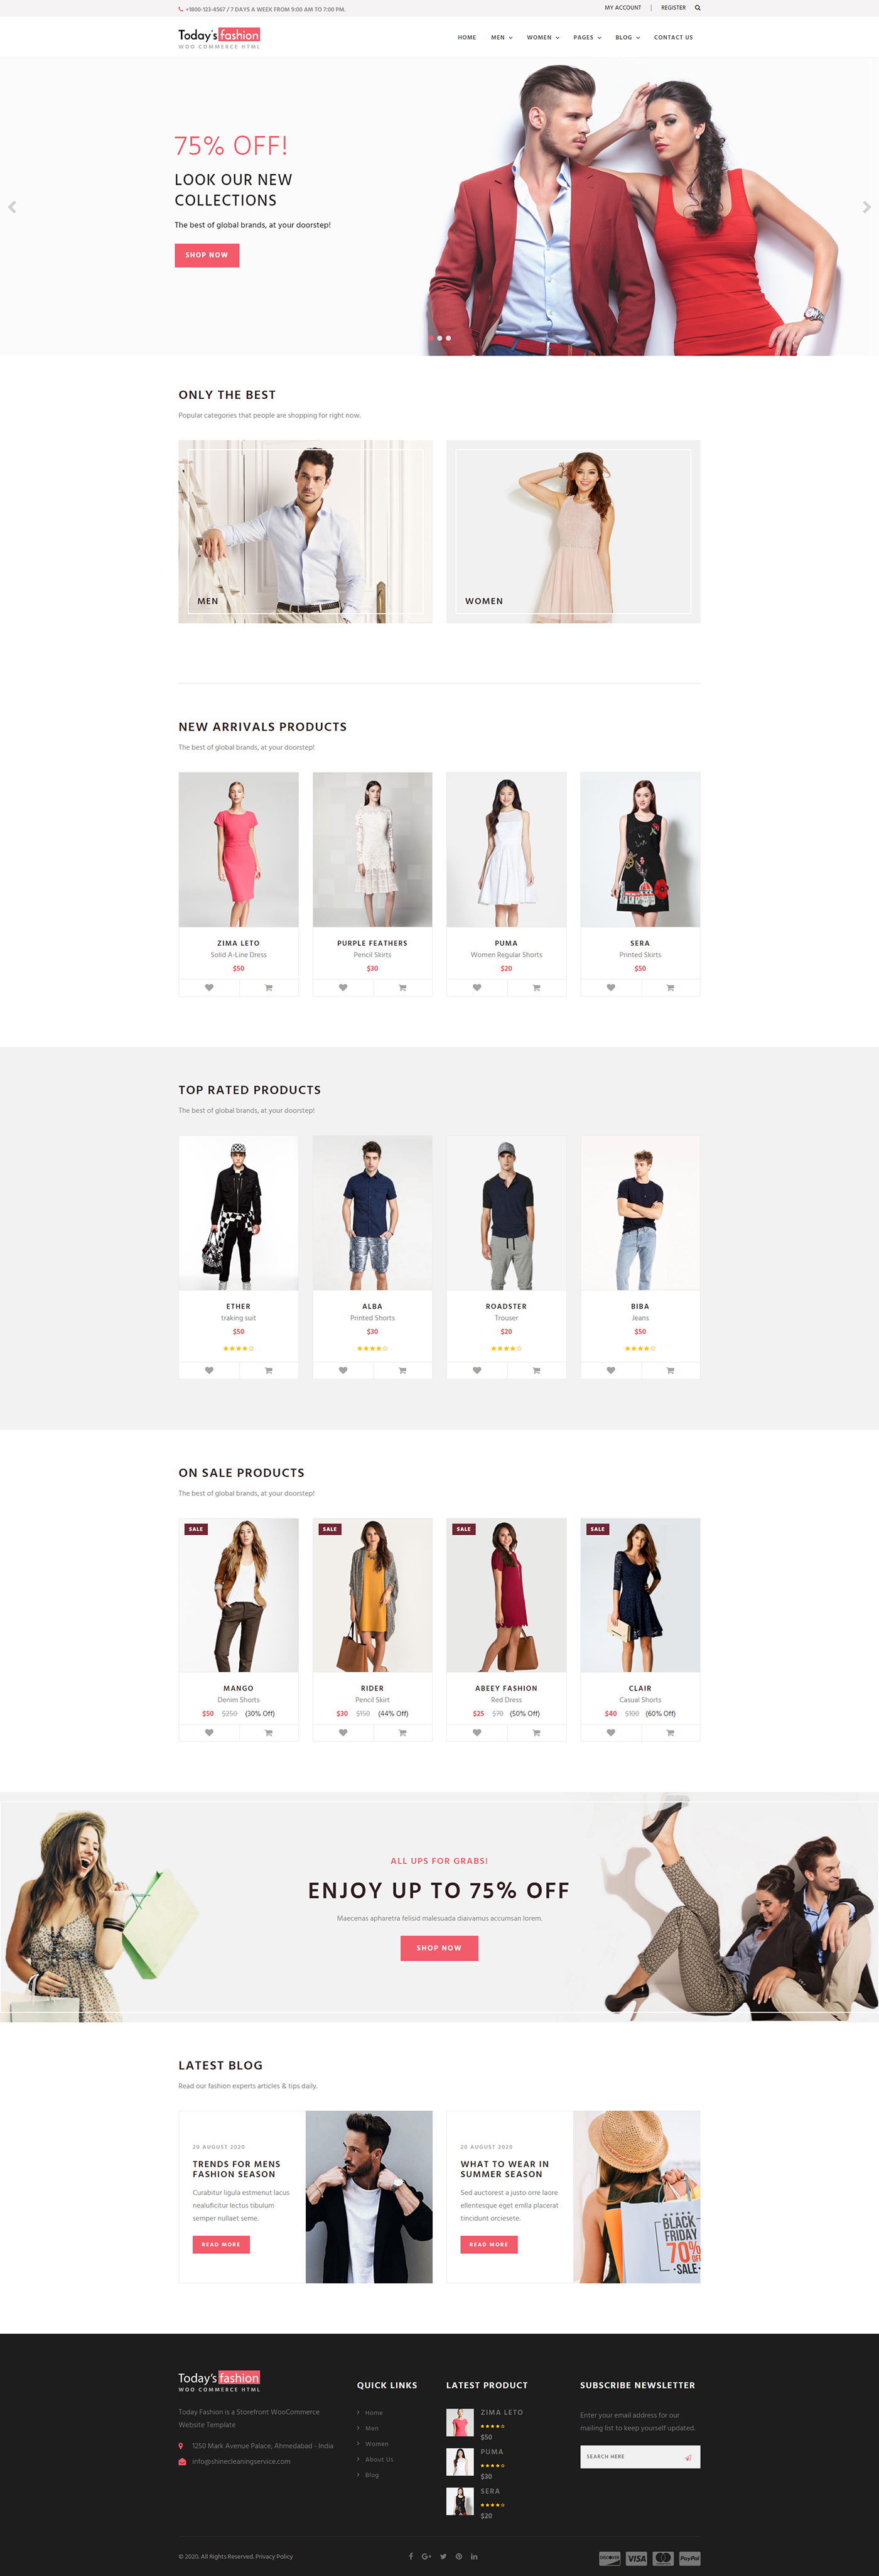 ecommerce free template apparel free template